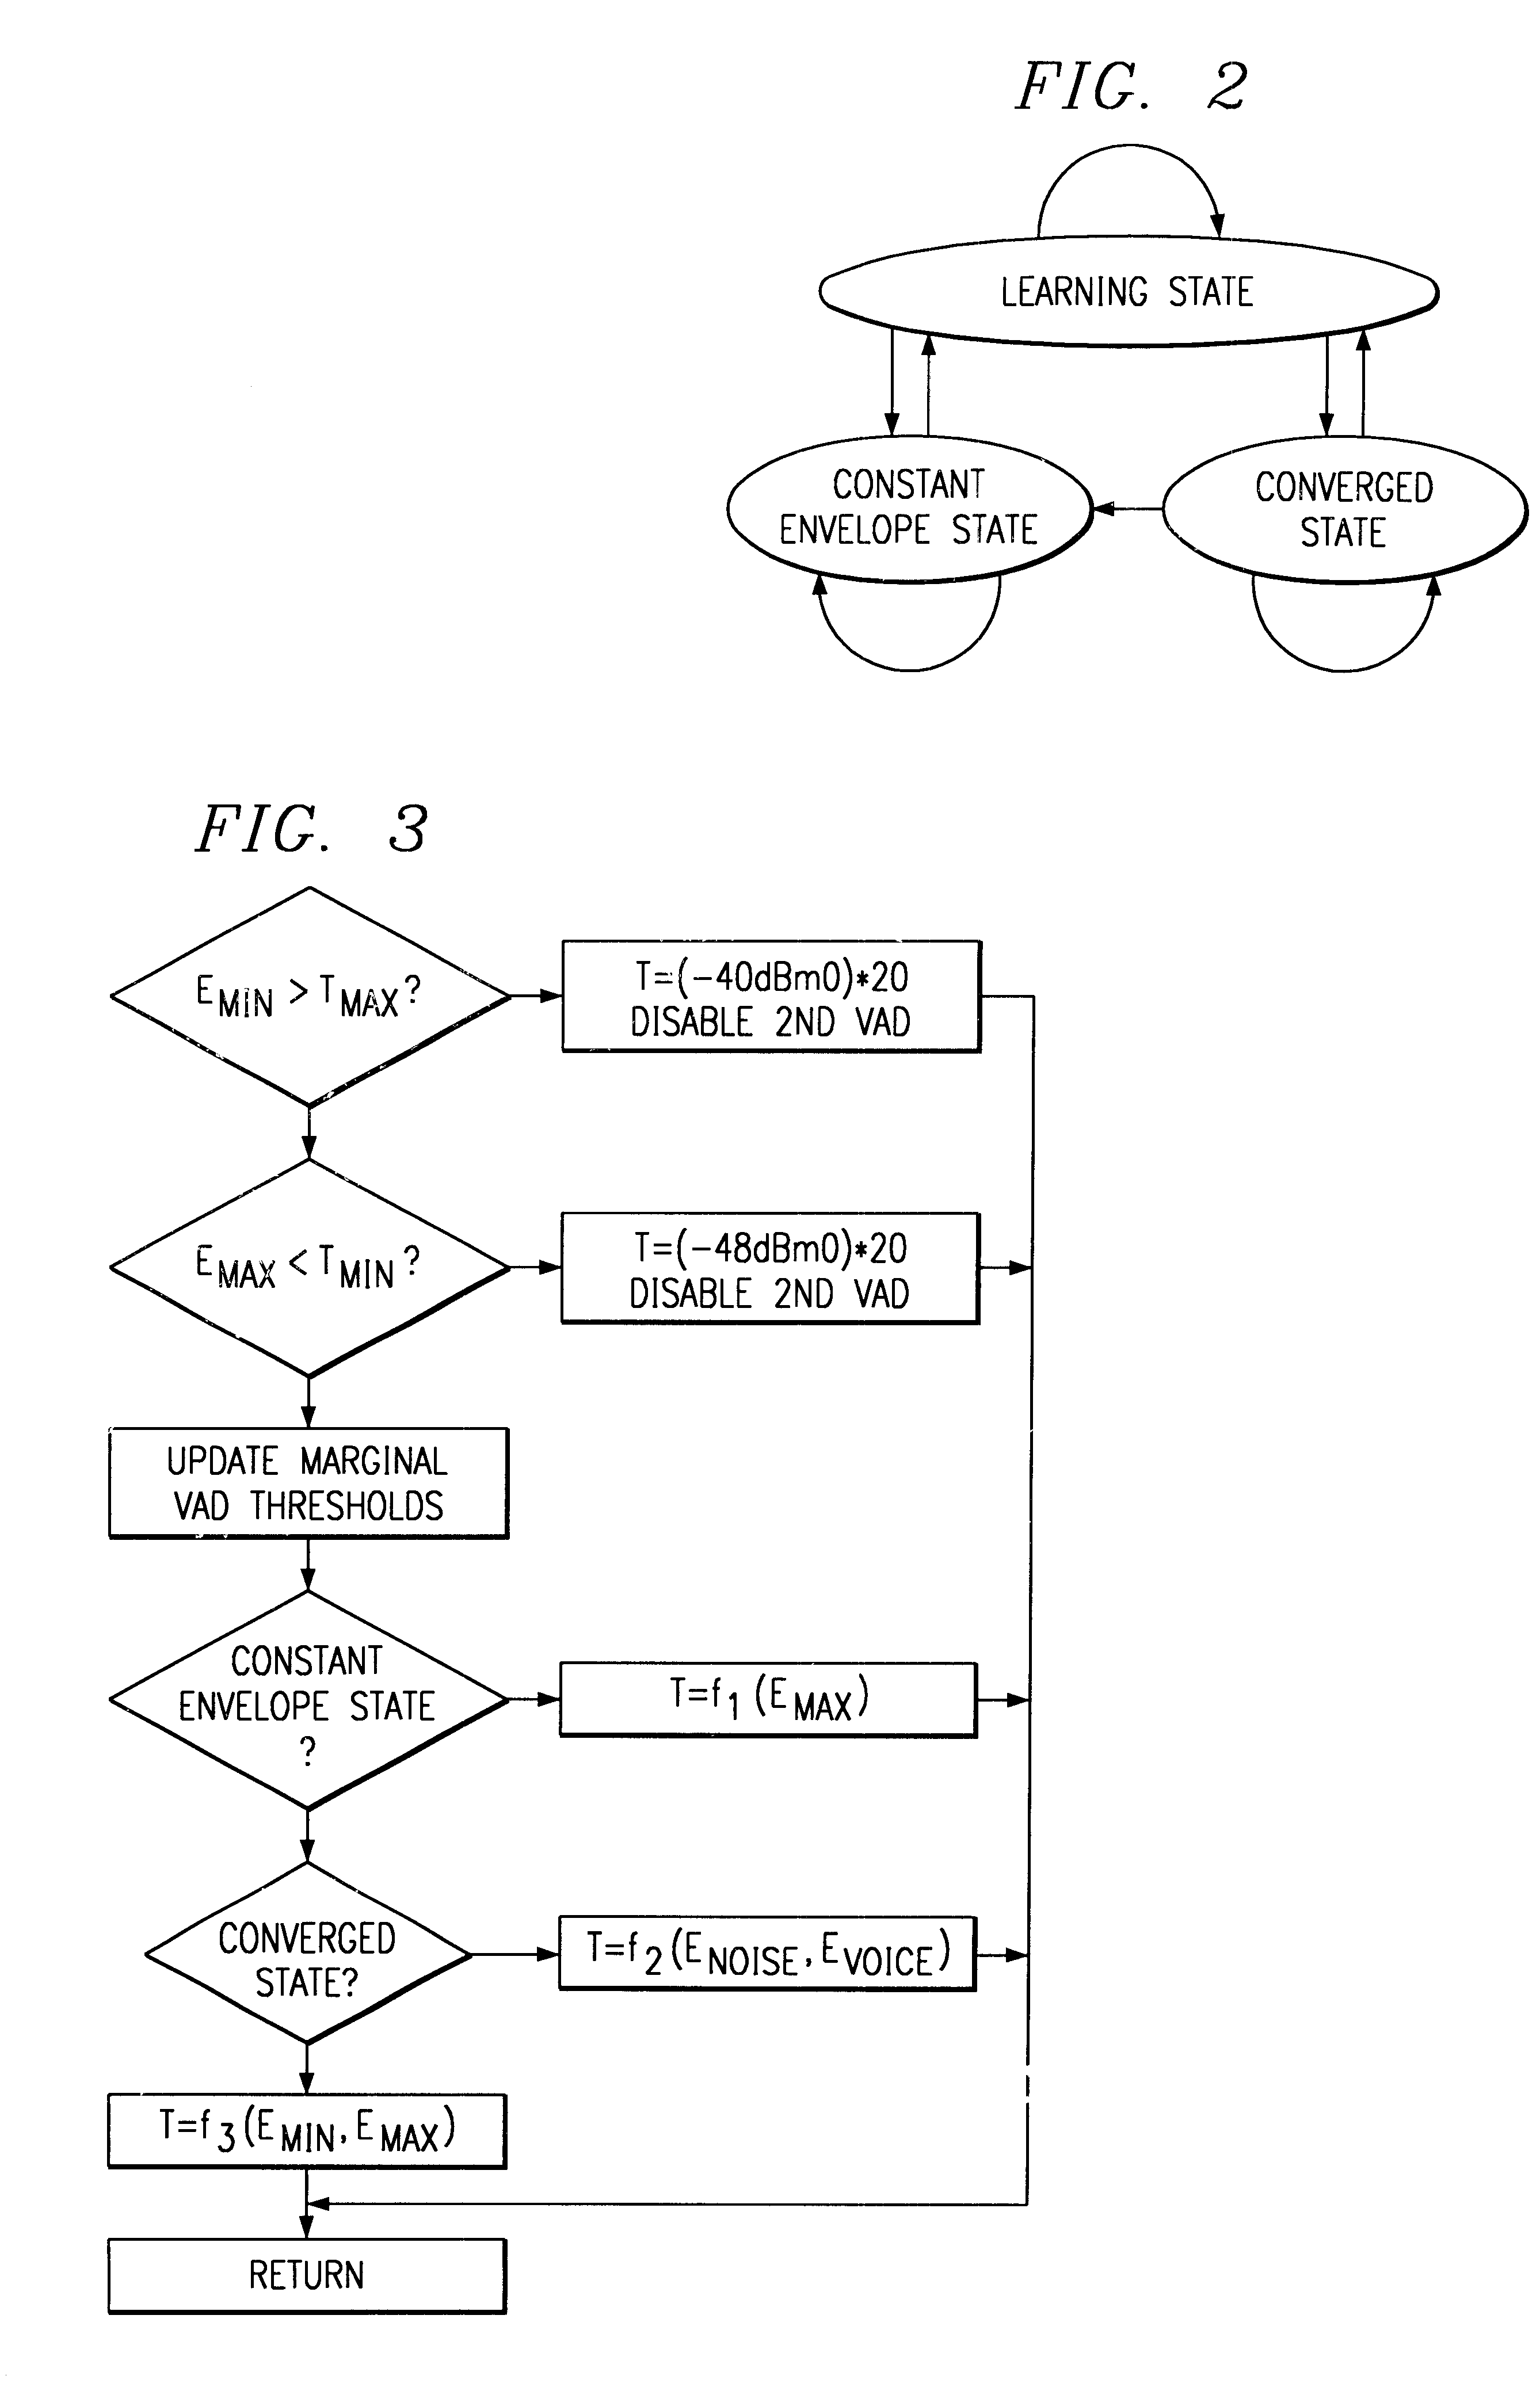 Adaptive two-threshold method for discriminating noise from speech in a communication signal